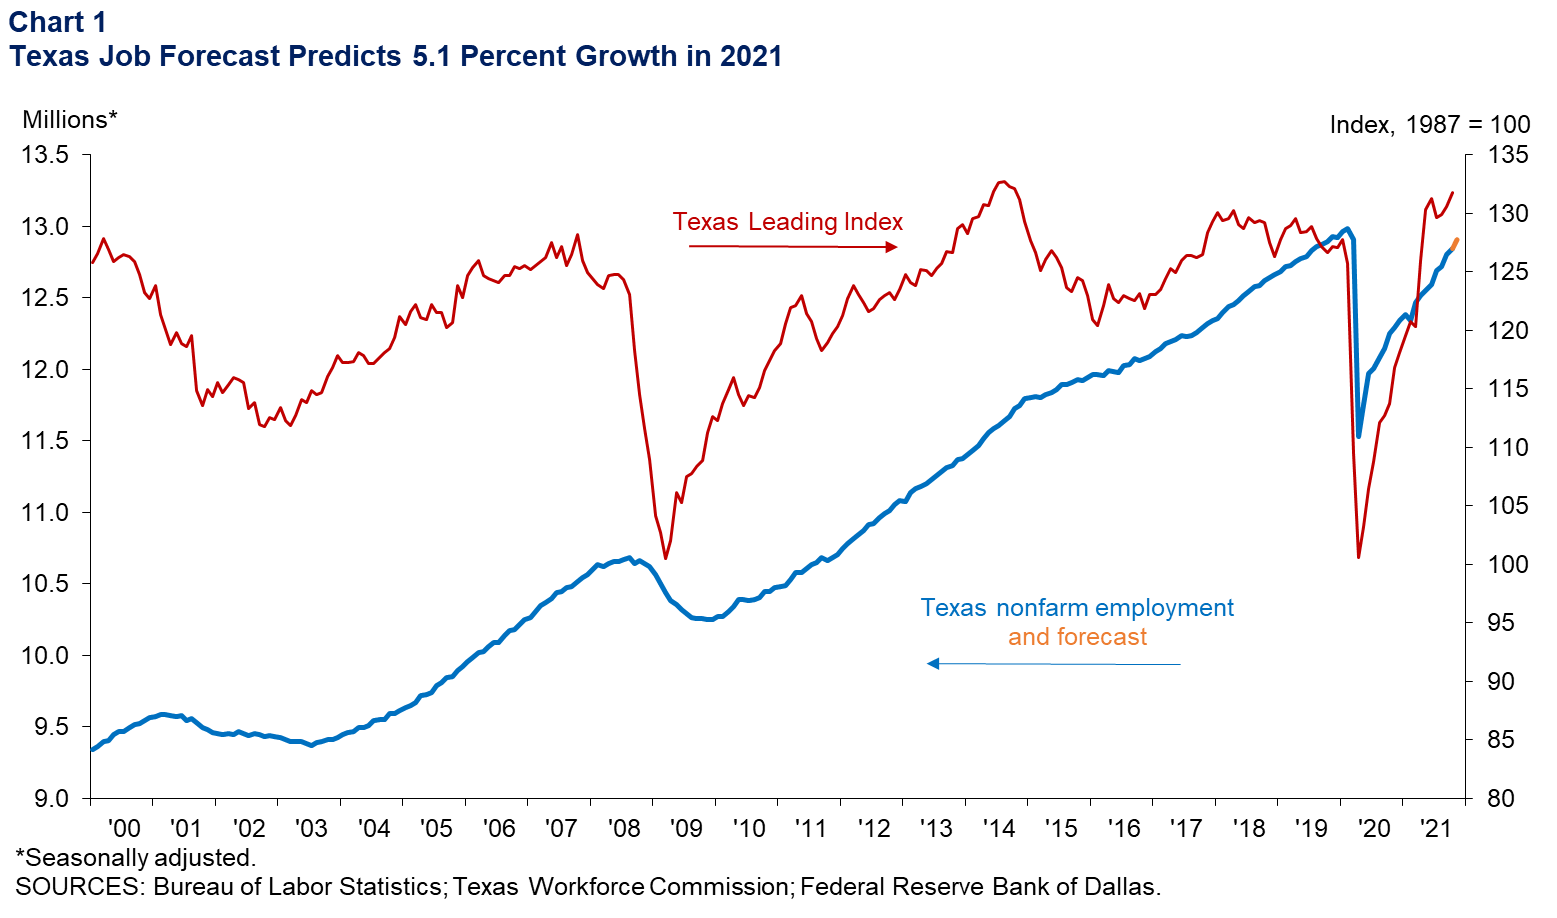 Texas Job Forecast Predicts 5.1 Percent Growth in 2021